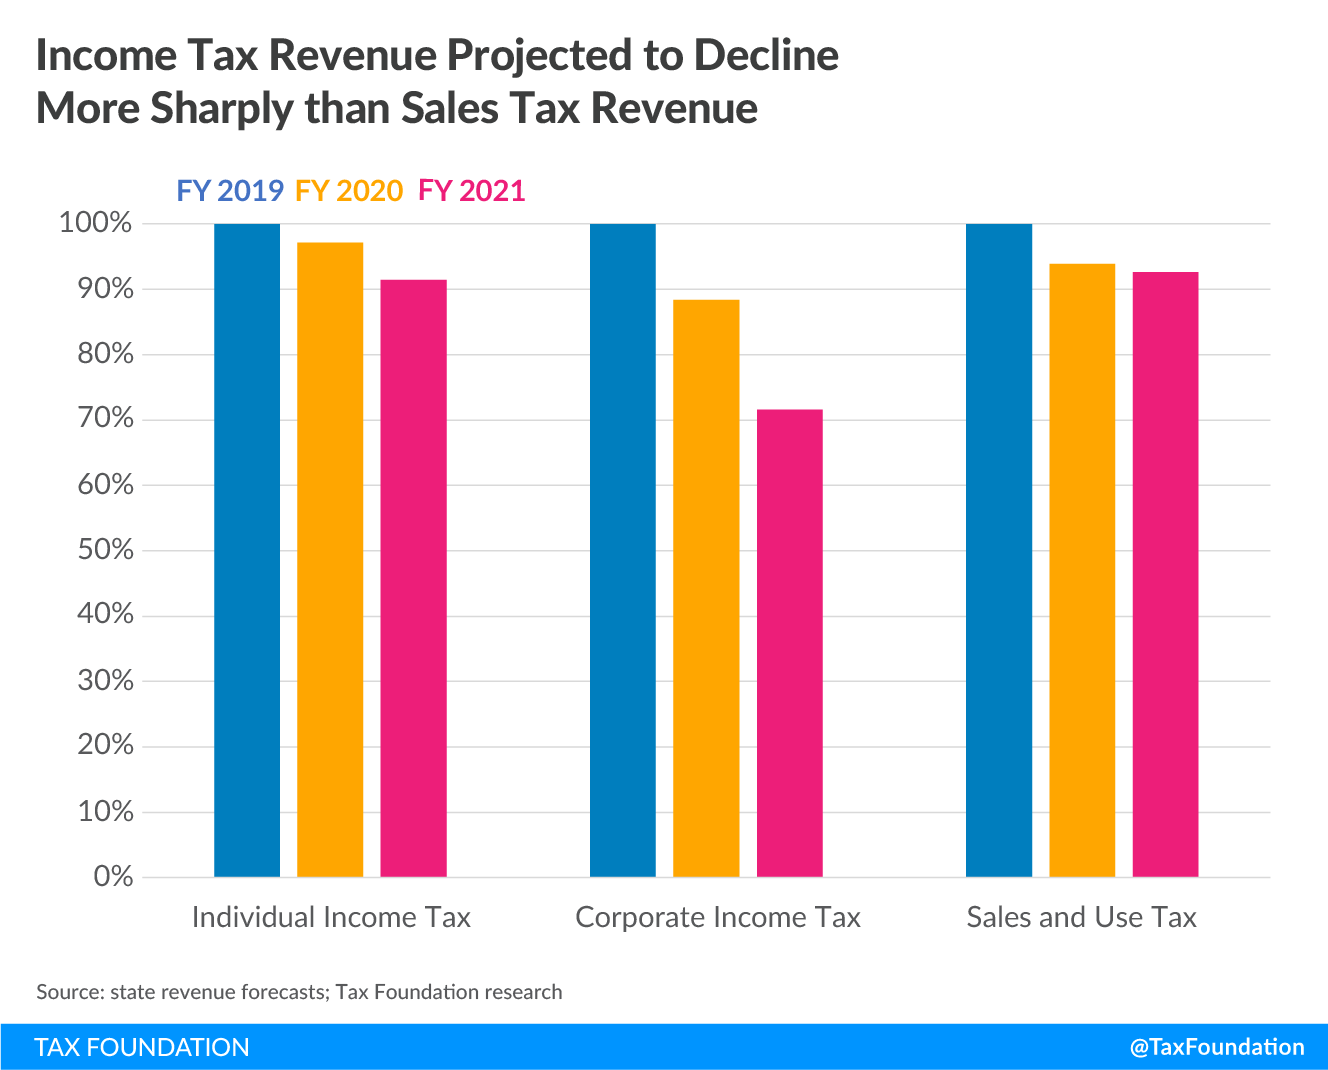 state revenue forecasts, state budget forecasts, projected state revenue losses